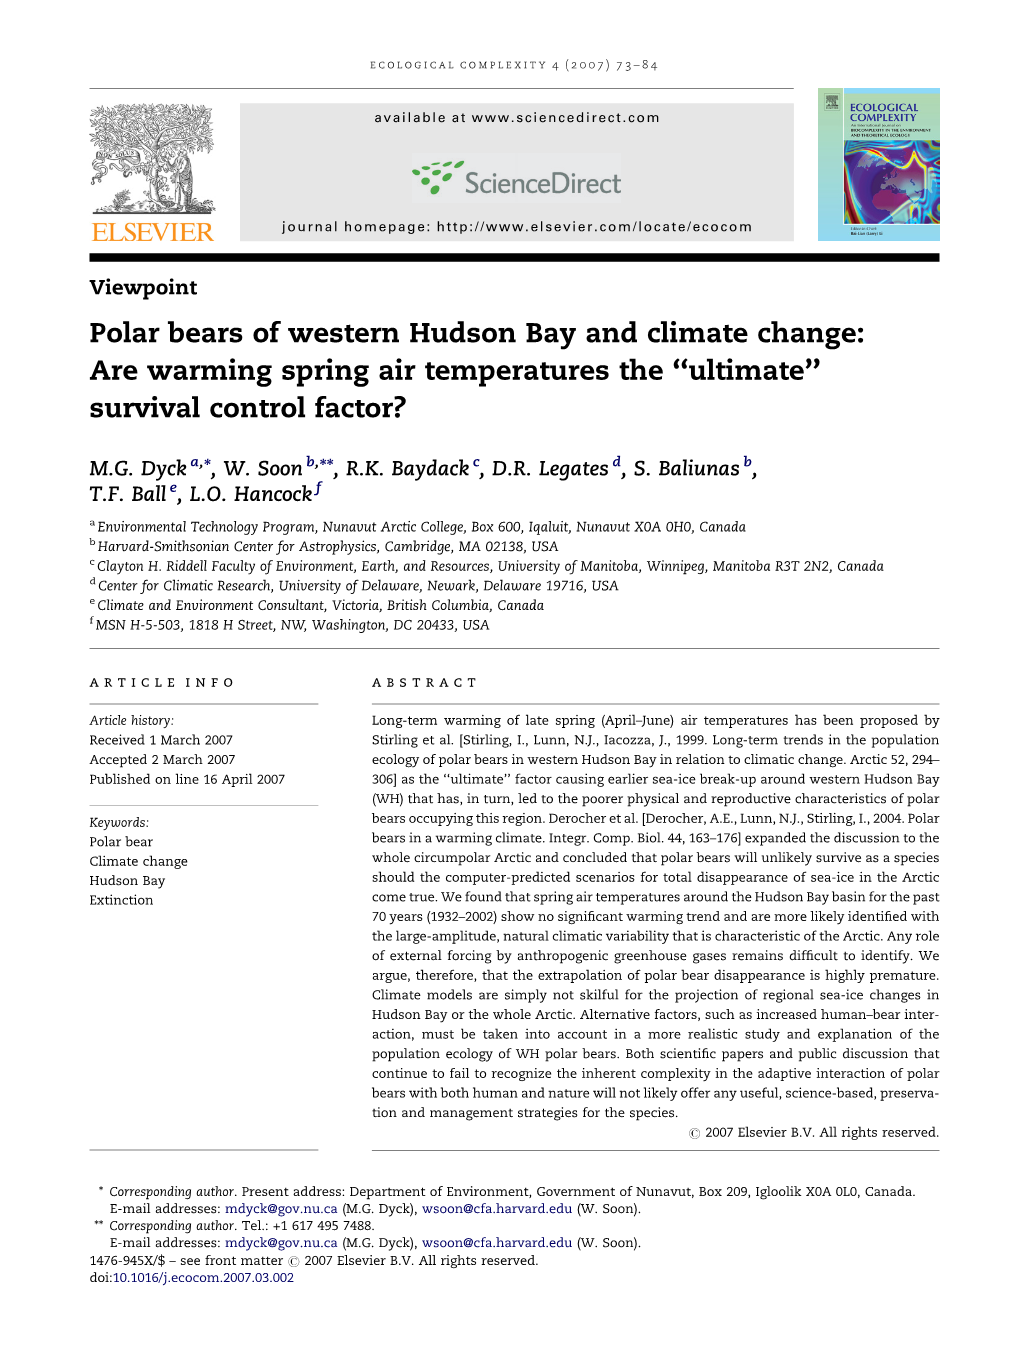 Polar Bears of Western Hudson Bay and Climate Change: Are Warming Spring Air Temperatures the ‘‘Ultimate’’ Survival Control Factor?